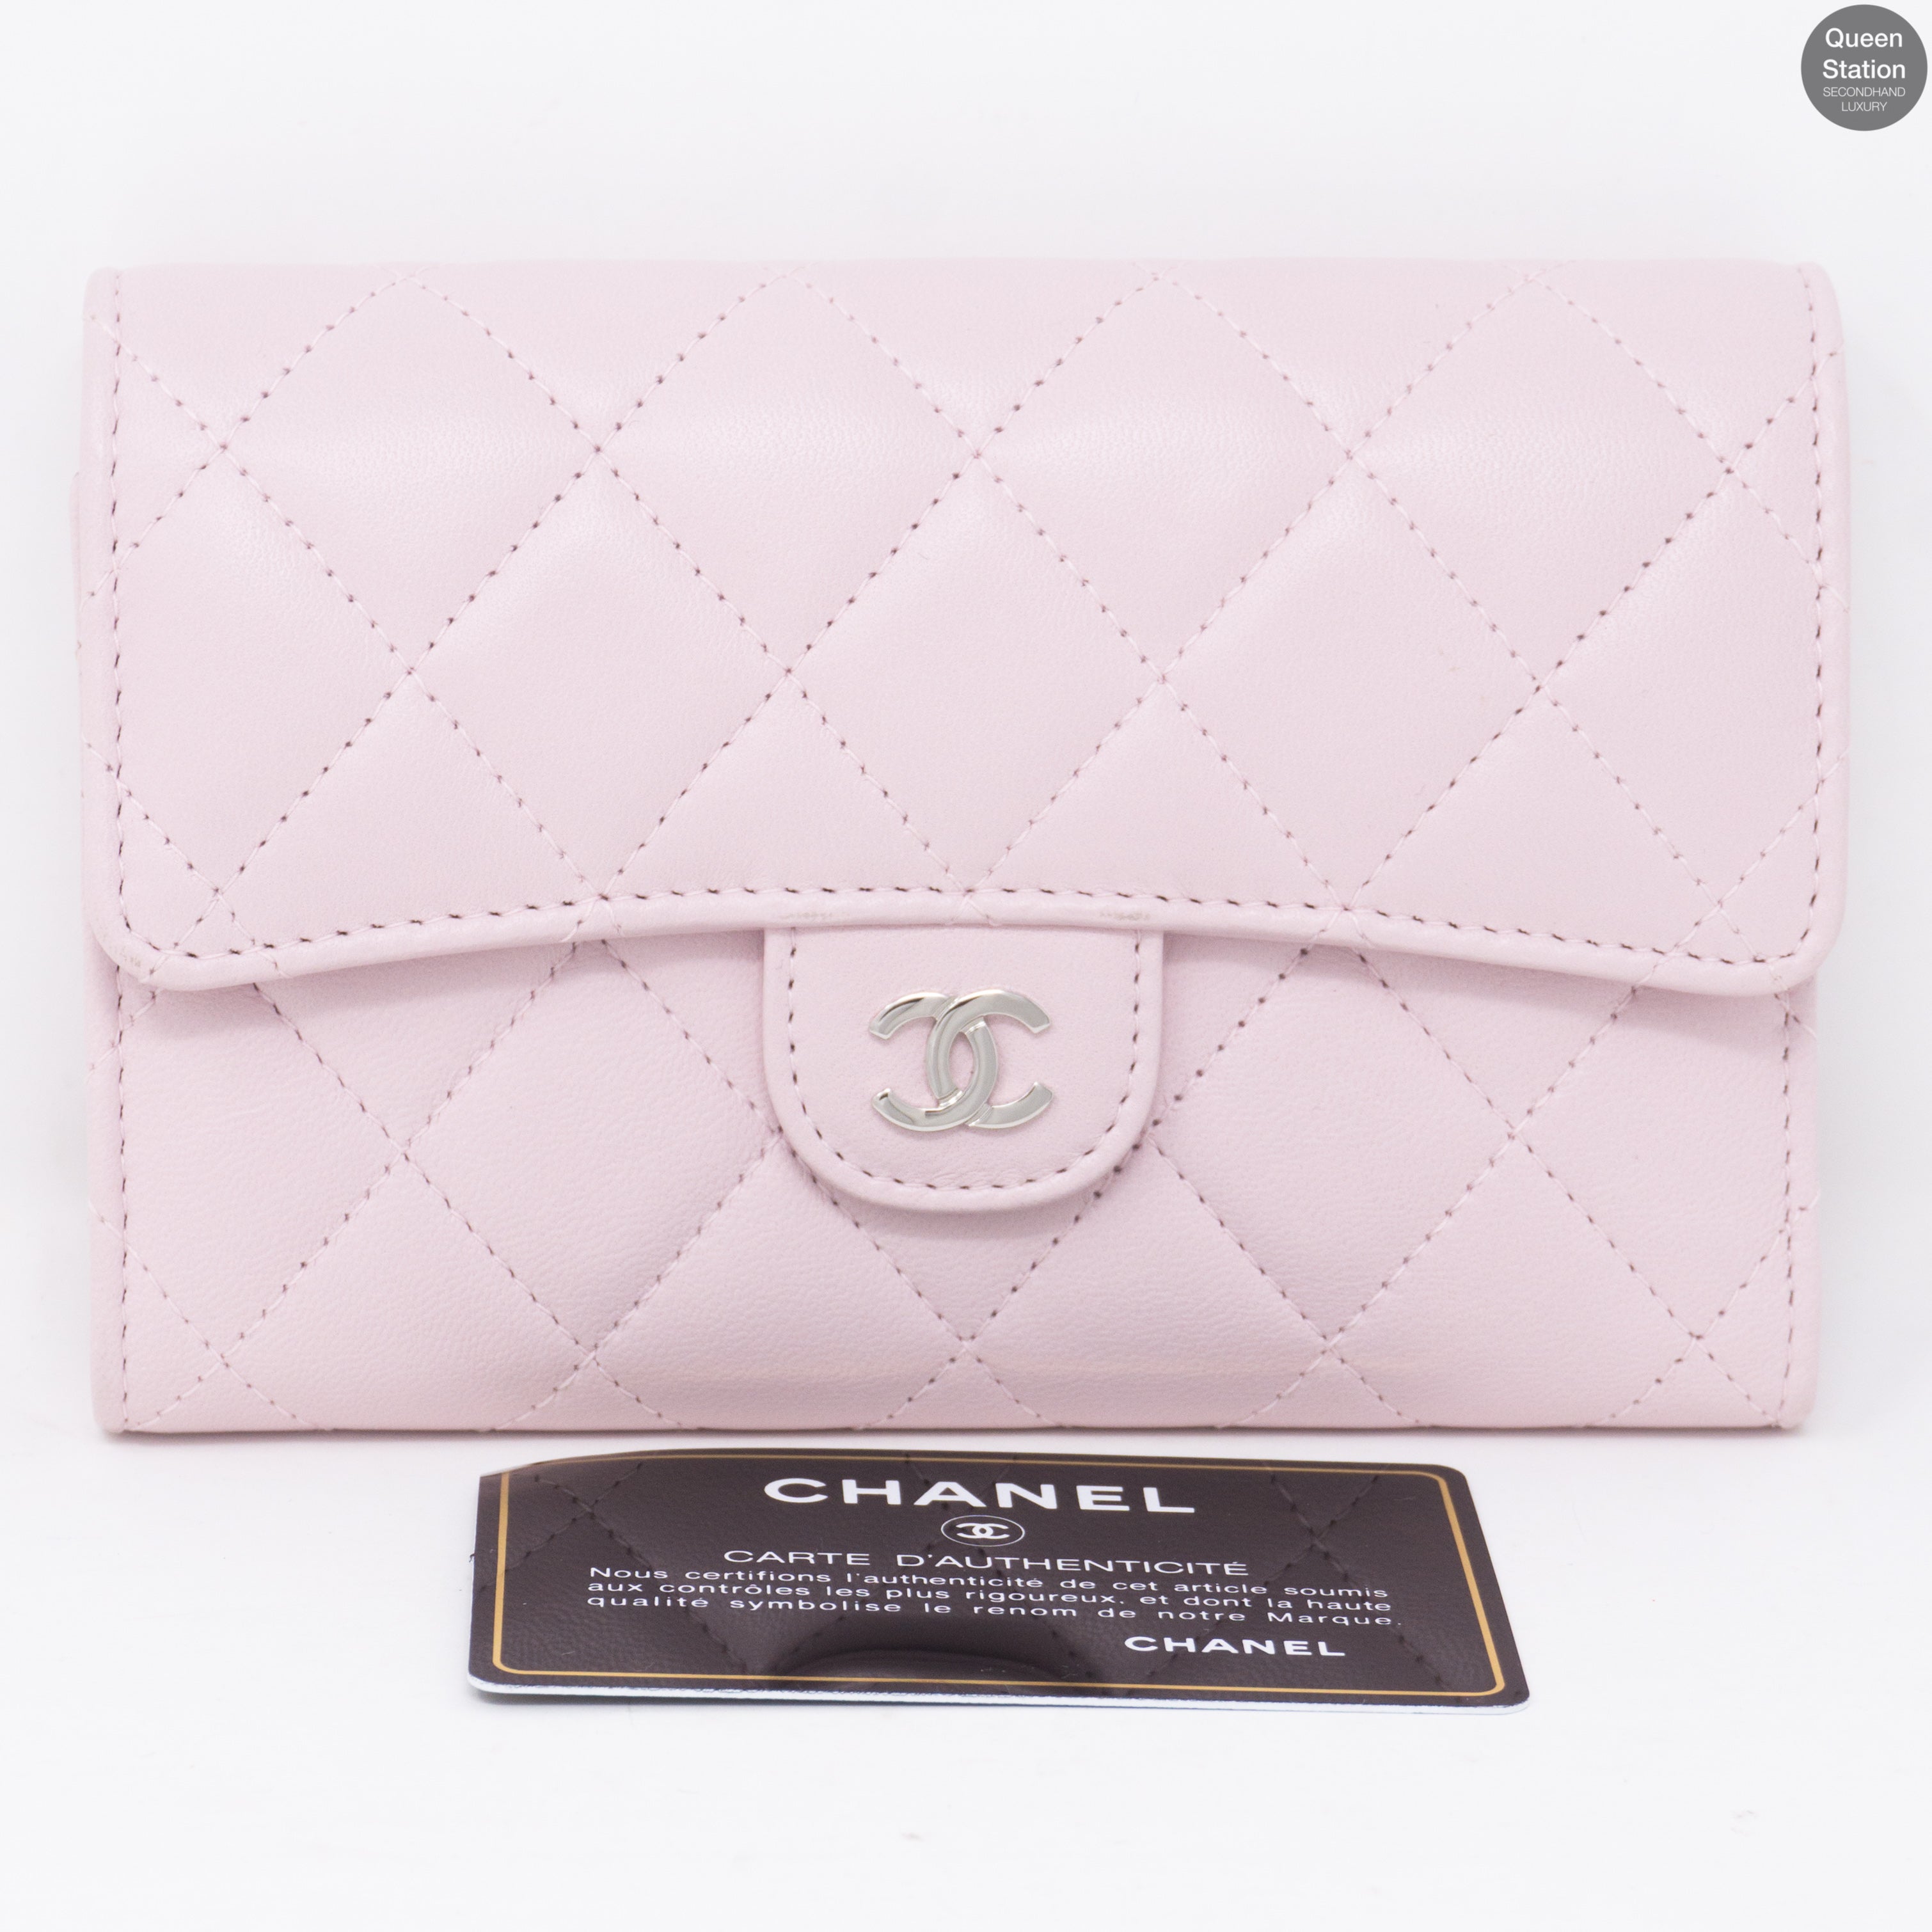 Chanel Classic Long Flap Wallet Ap0241 Y33352 NM368 , Pink, One Size